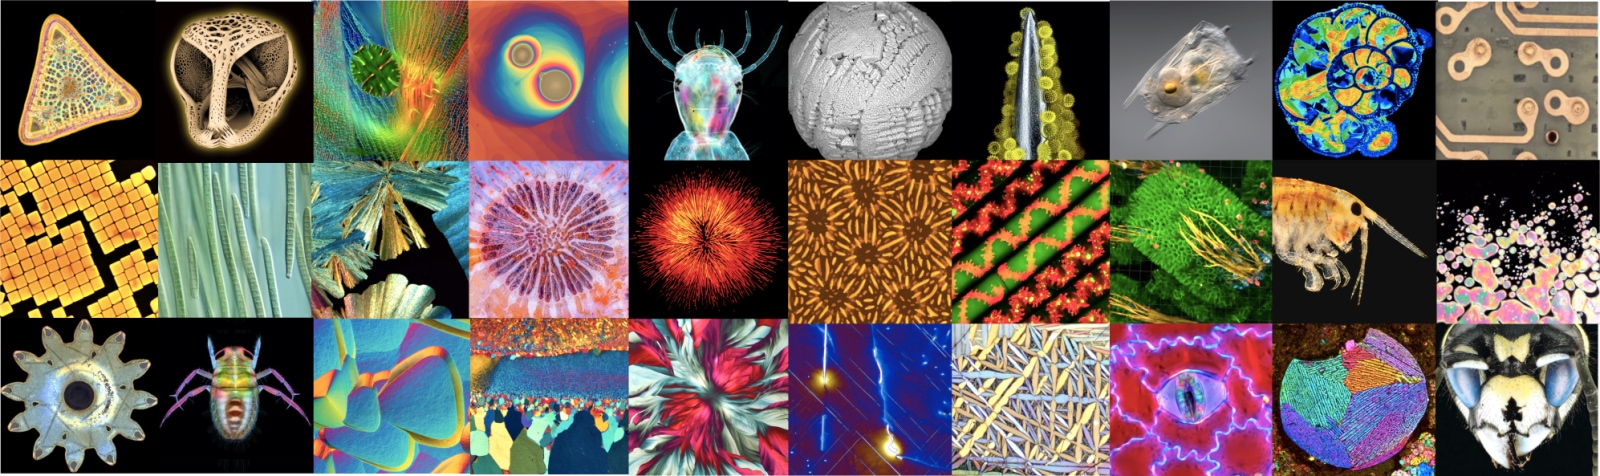 Composite background image: a selection of finalist images from five Microscopy Today Micrograph Awards competitions. Image credits and subject identifications may be found in the July issues for 2019-2023.